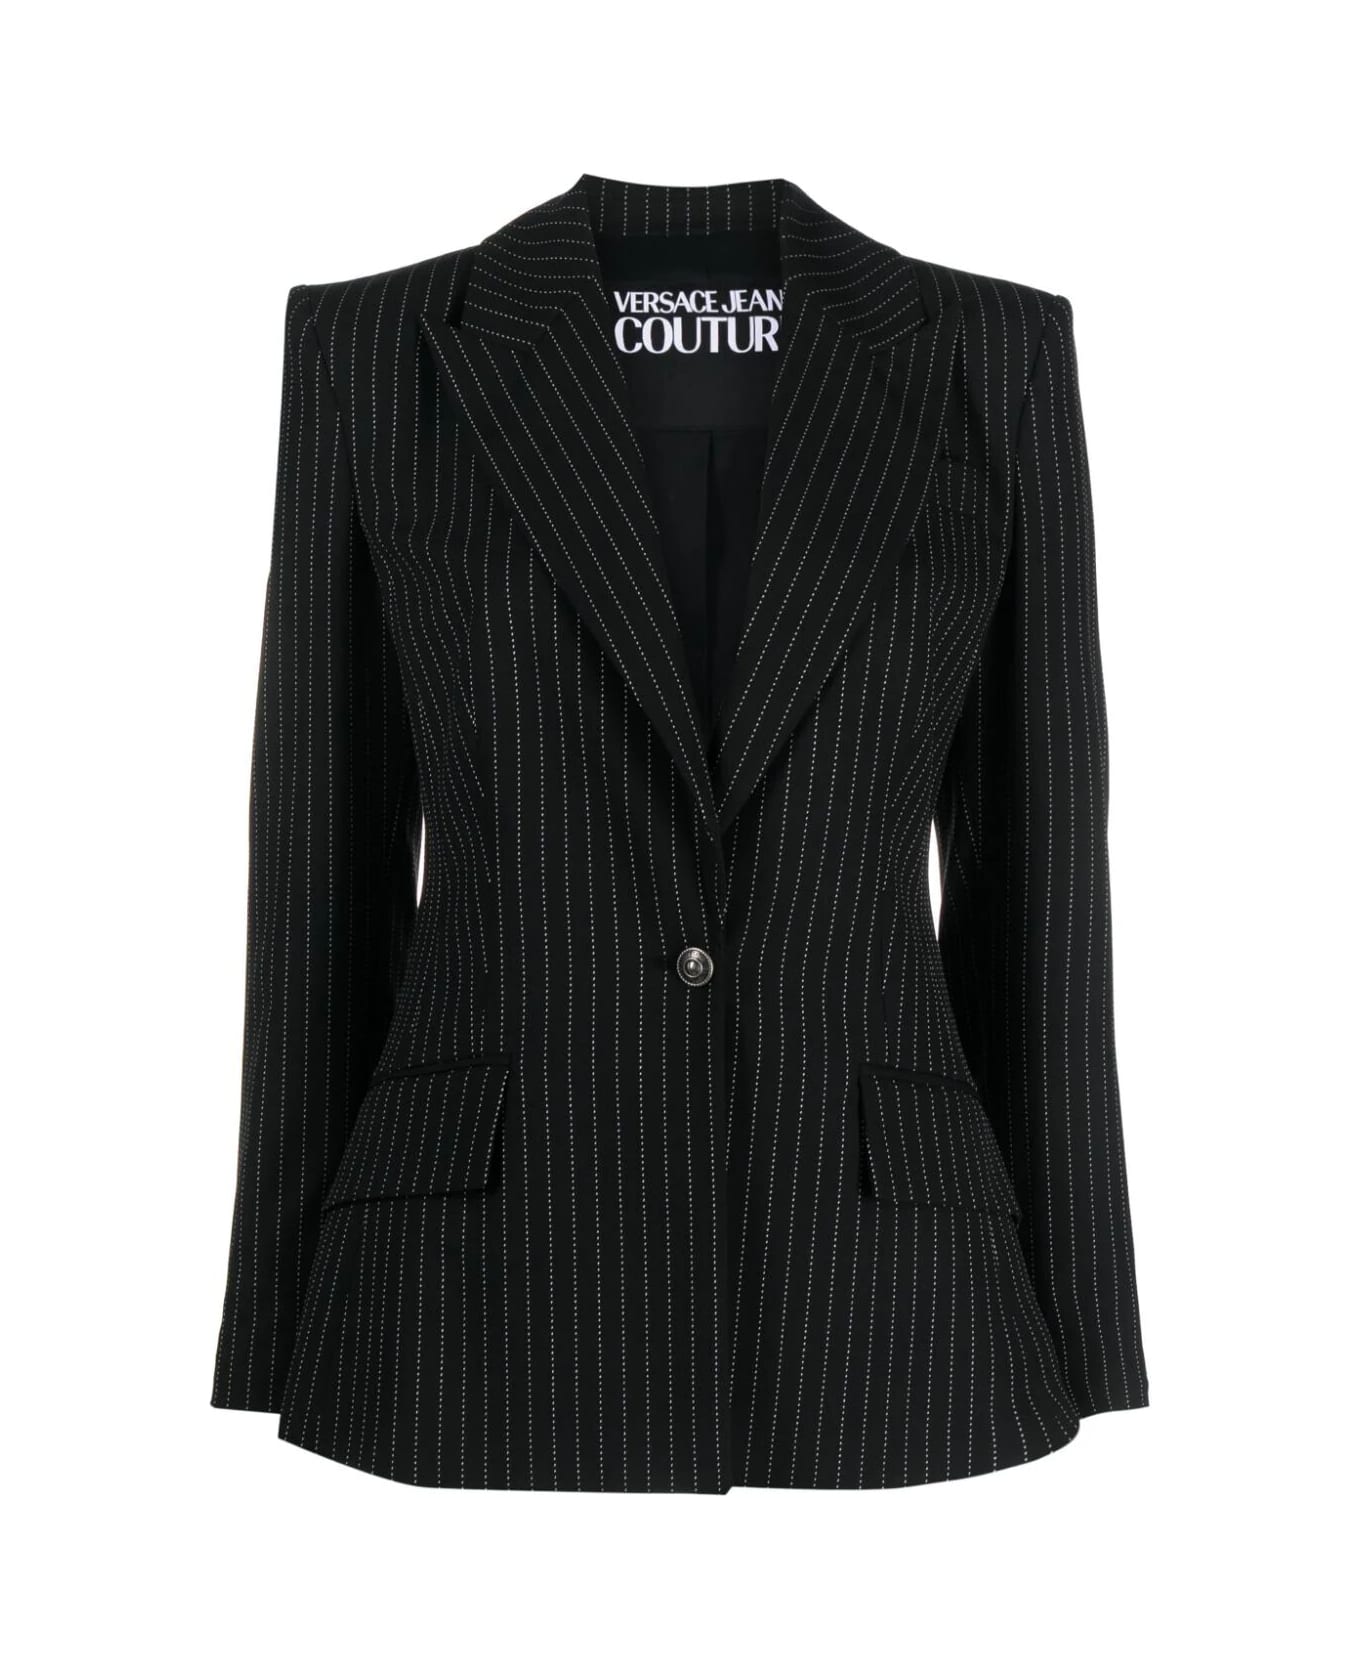 Versace Jeans Couture Tailored Jacket - Black ブレザー